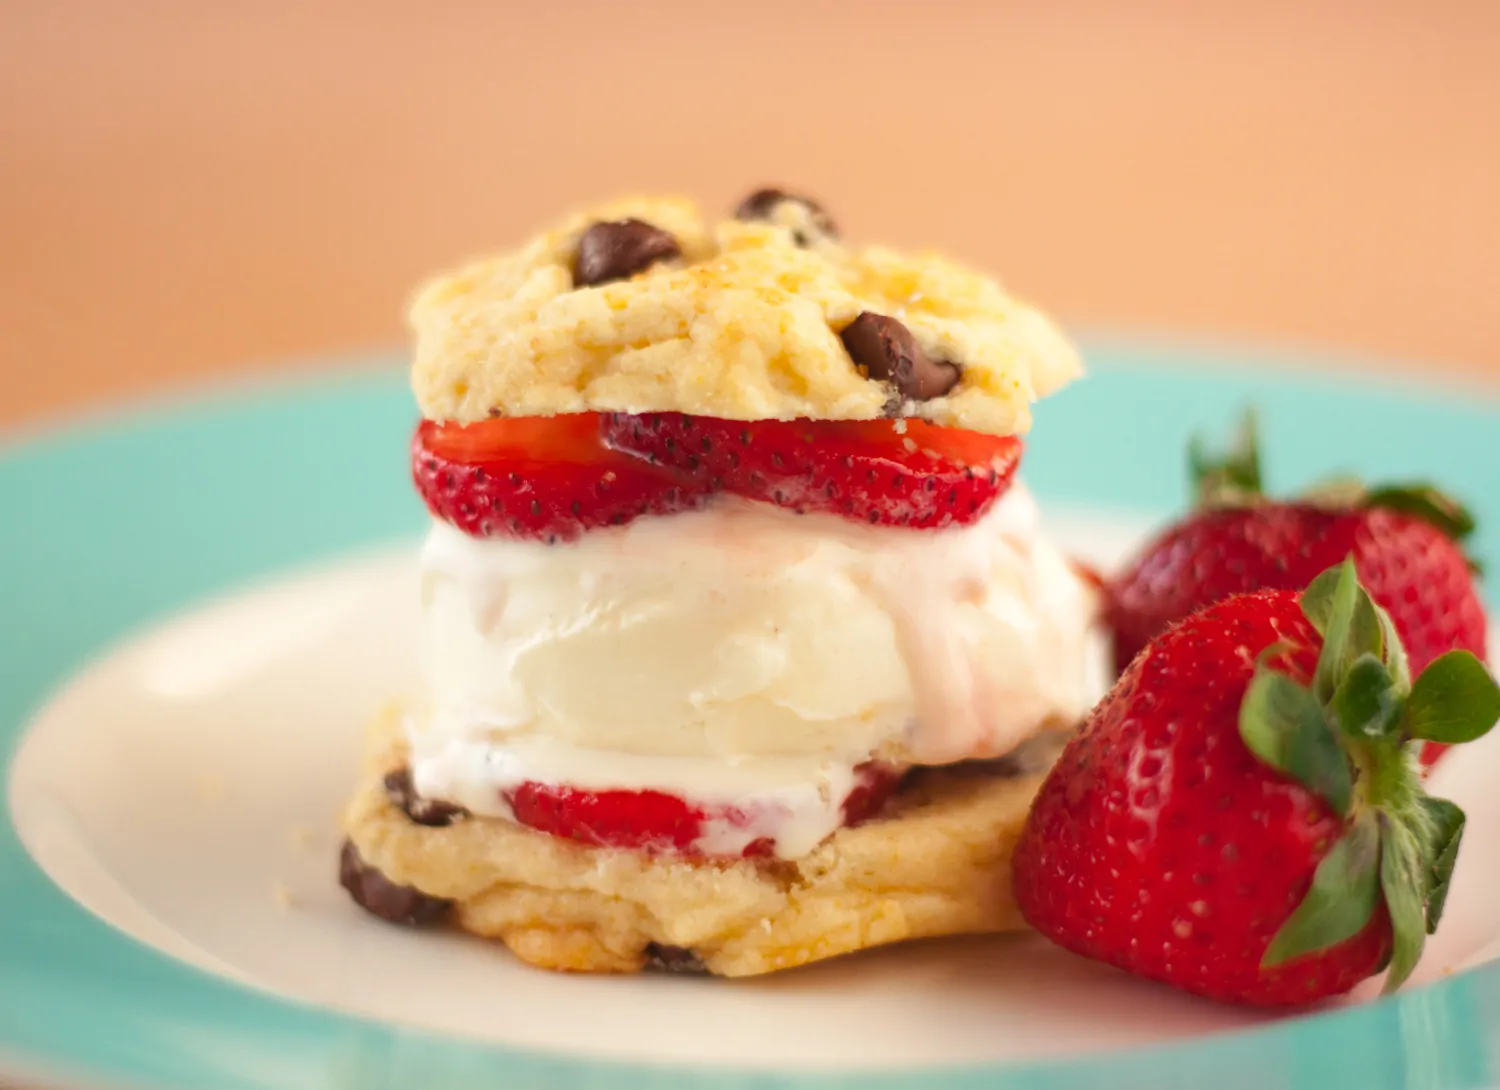 Strawberries and Chocolate Chip Cookie Ice Cream Sandwiches